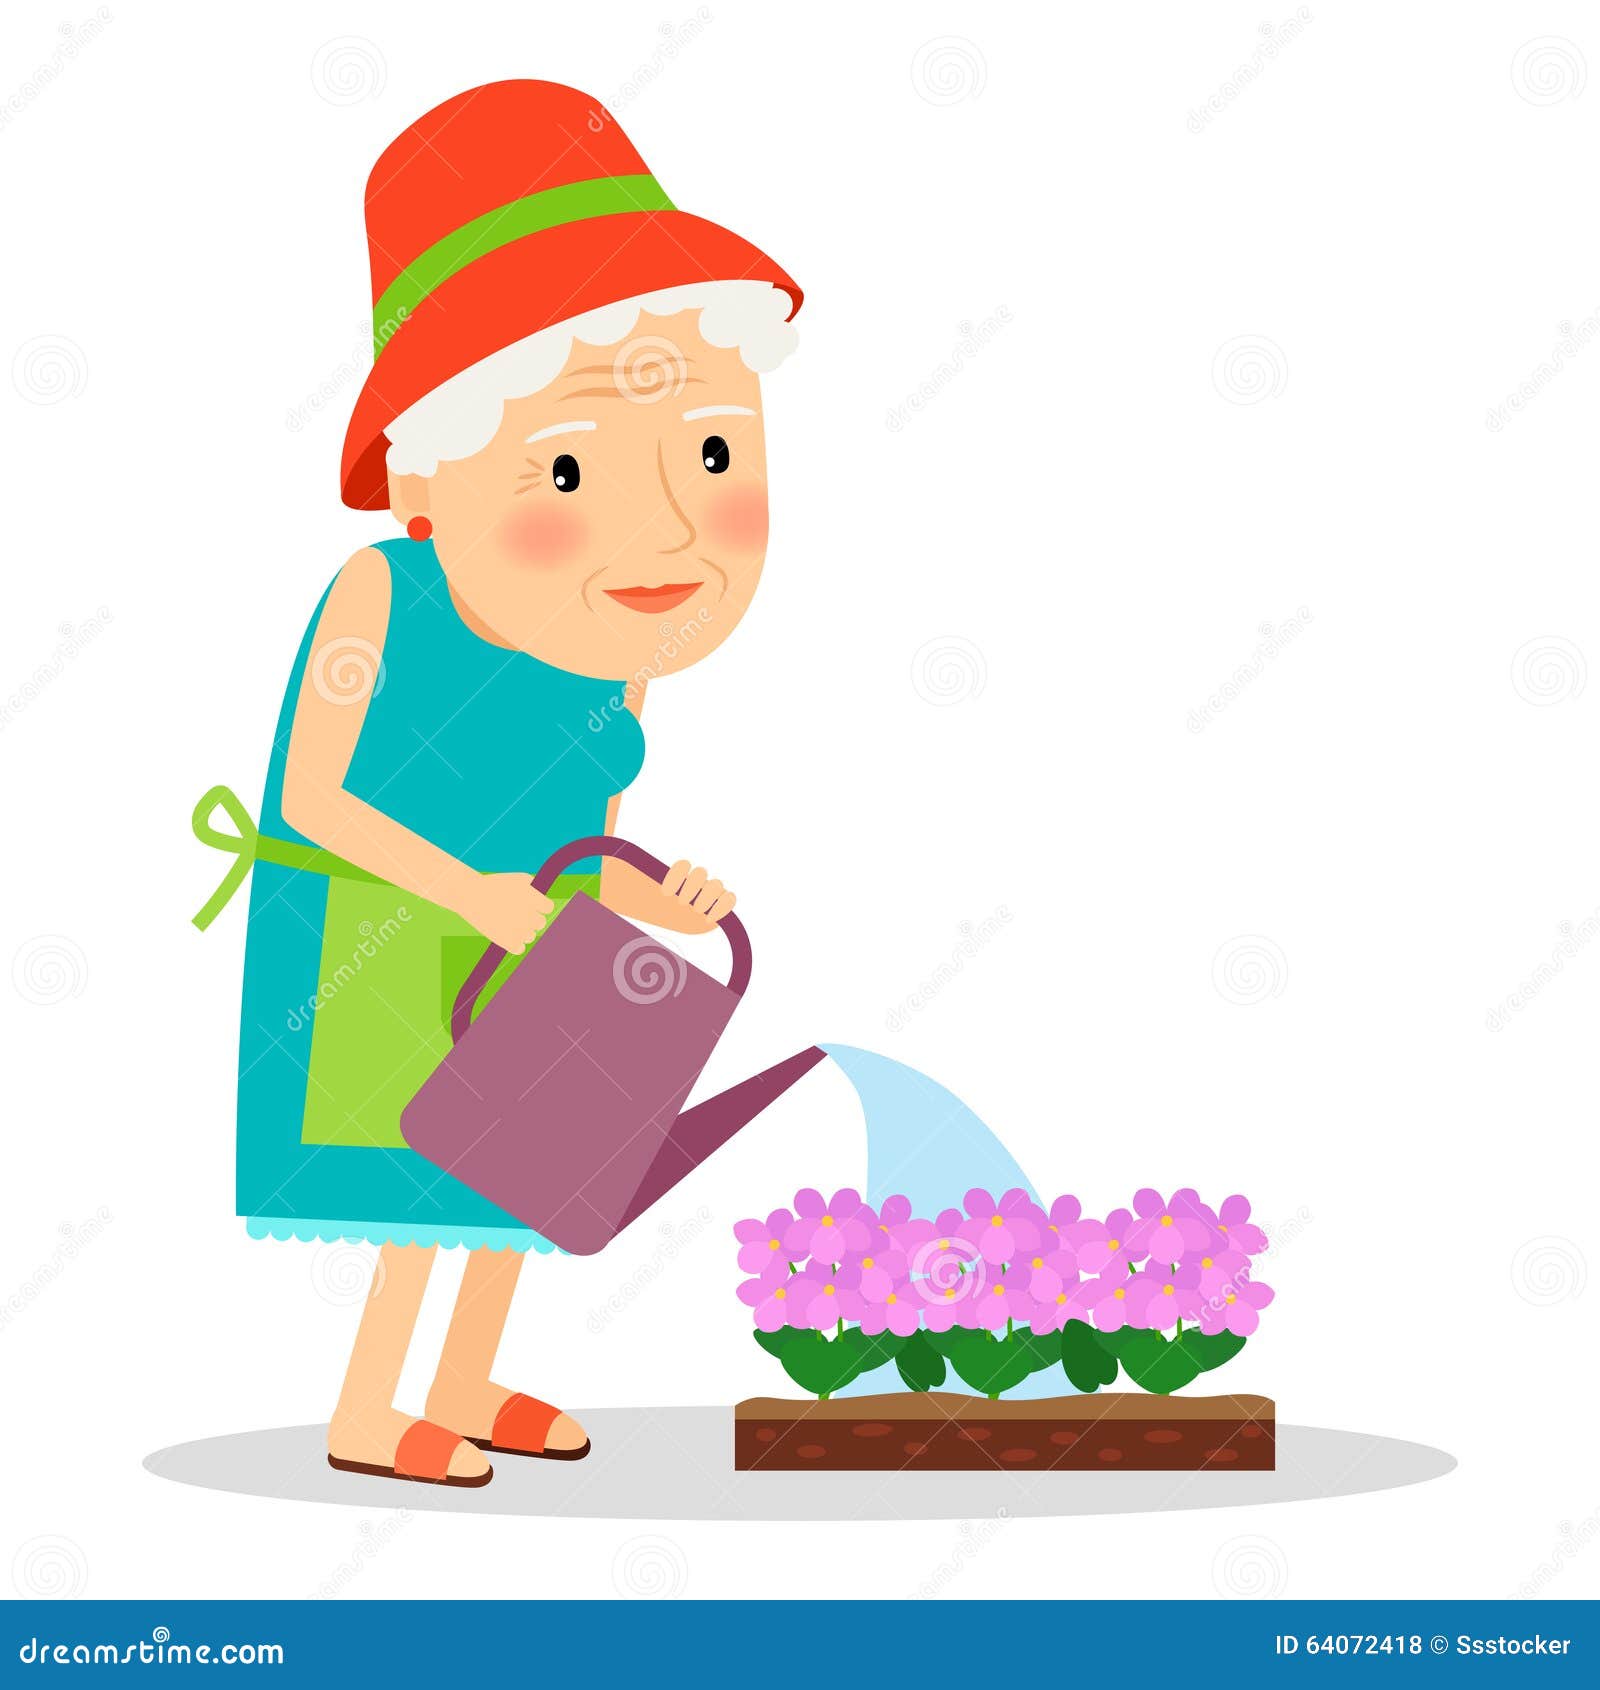 Old woman watering flowers stock vector. Illustration of person - 64072418